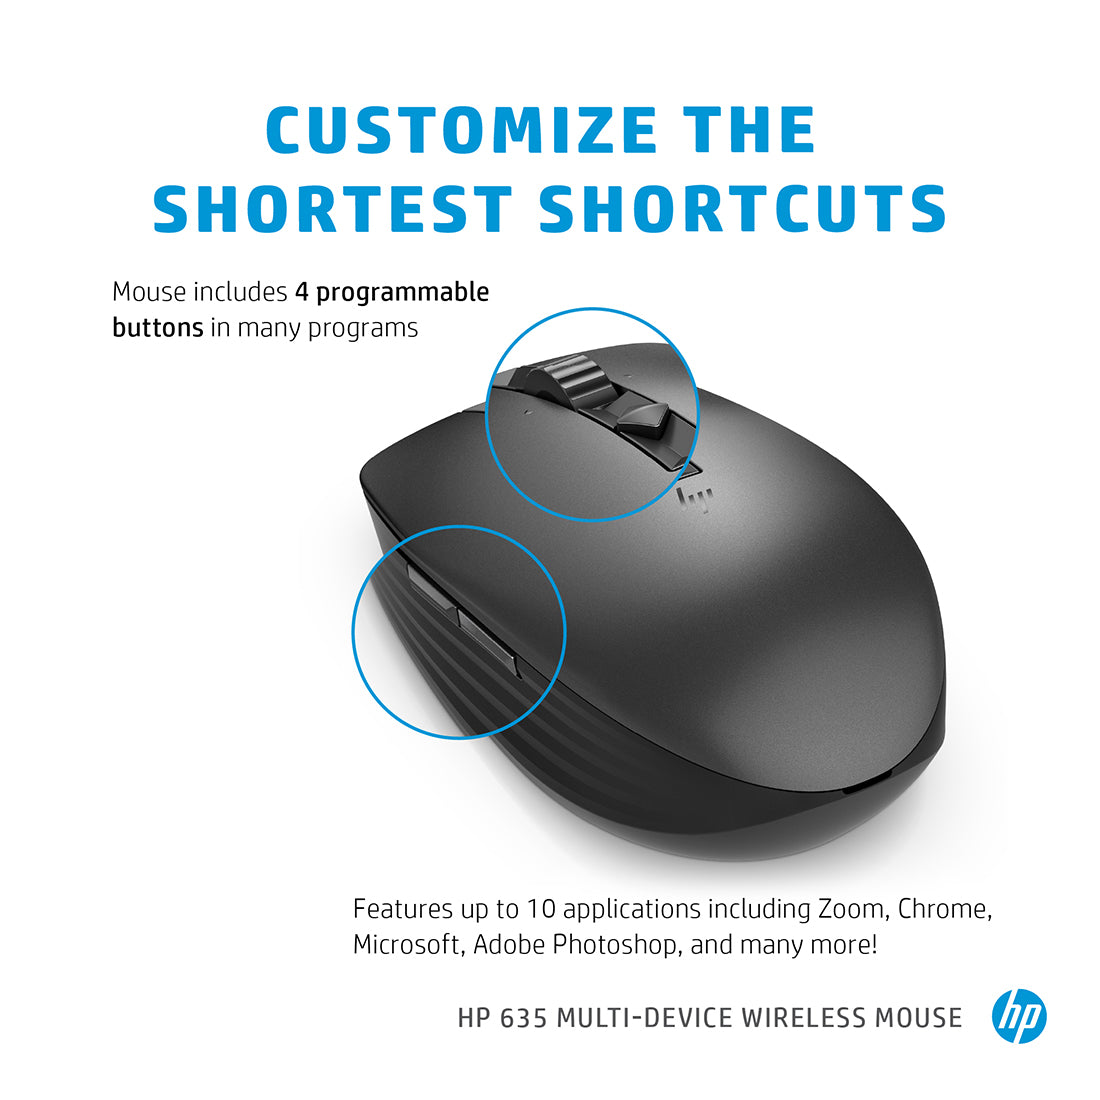 HP 635 Multi-Device Wireless Optical Mouse with 4 Programmable Buttons and Multi-Device Connectivity